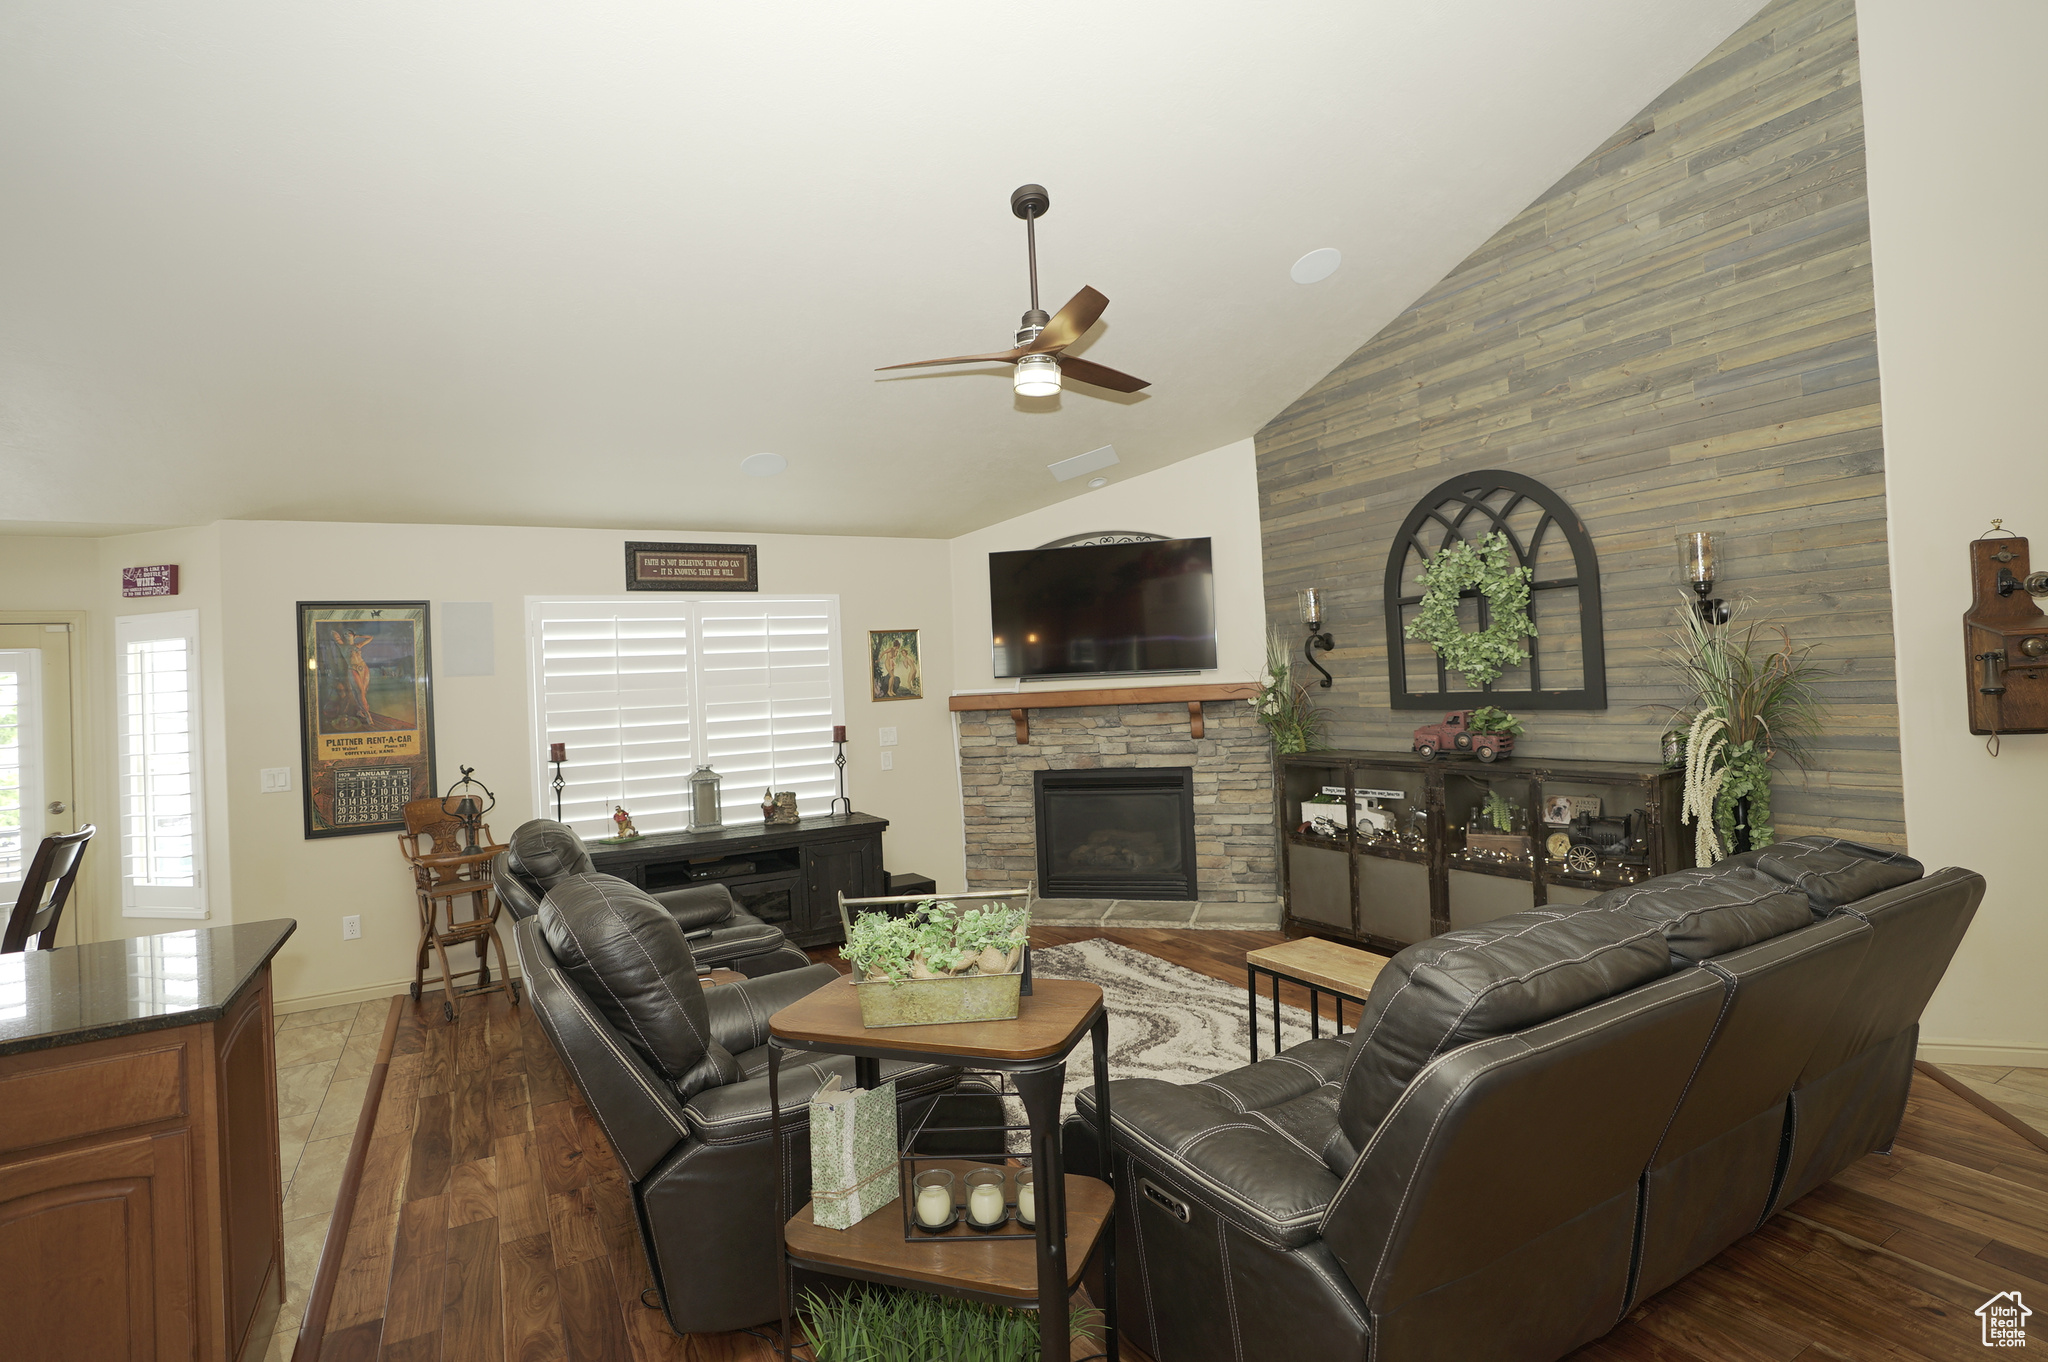 Living room with wood walls, ceiling fan, a fireplace, and lofted ceiling